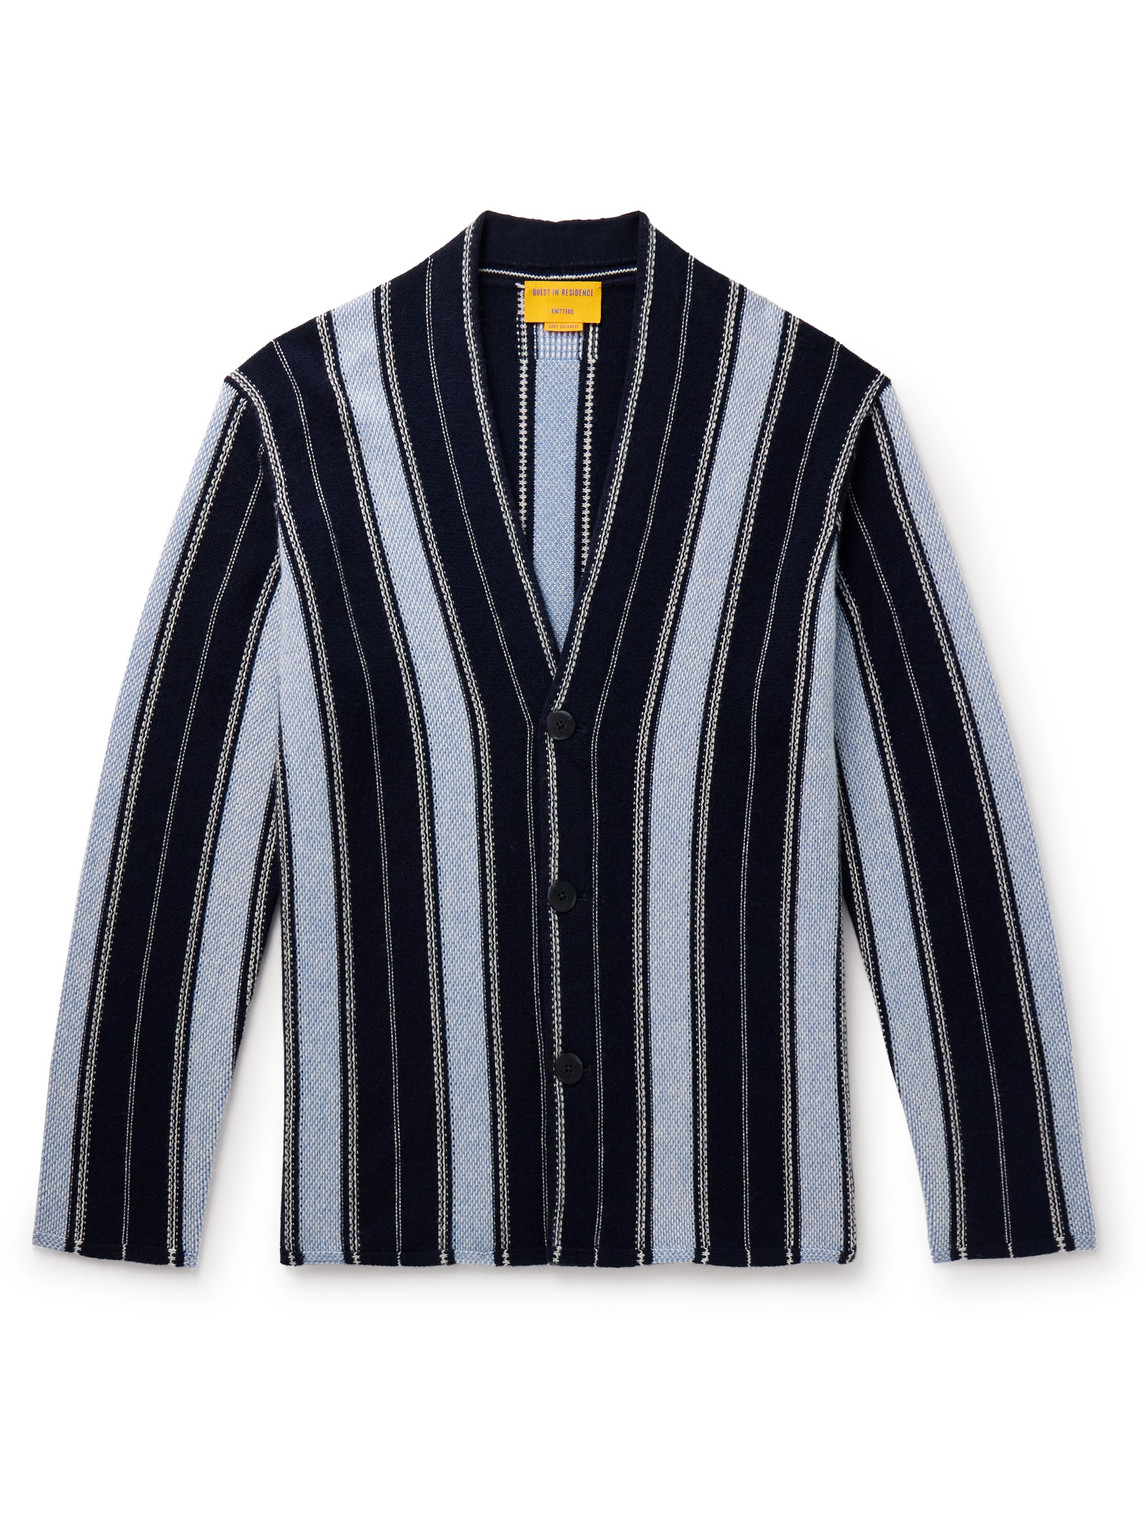 Guest In Residence - Baja Everywear Striped Cashmere Cardigan - Men - Blue - M von Guest In Residence